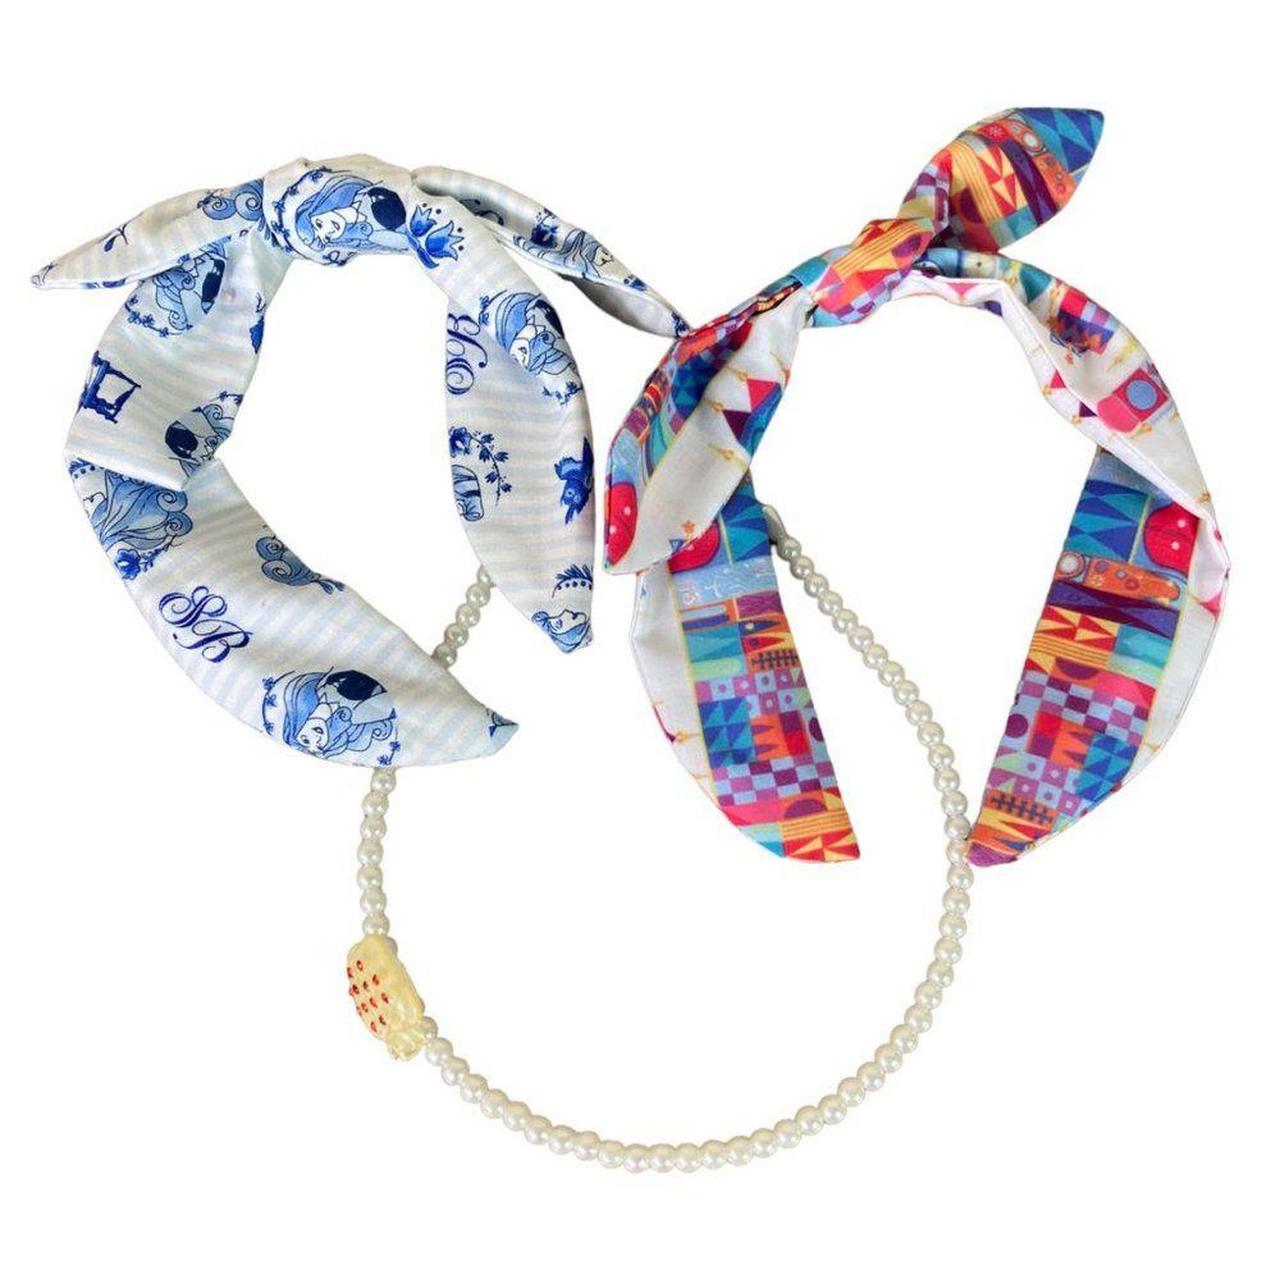 Disney Women's White and Blue Hair-accessories